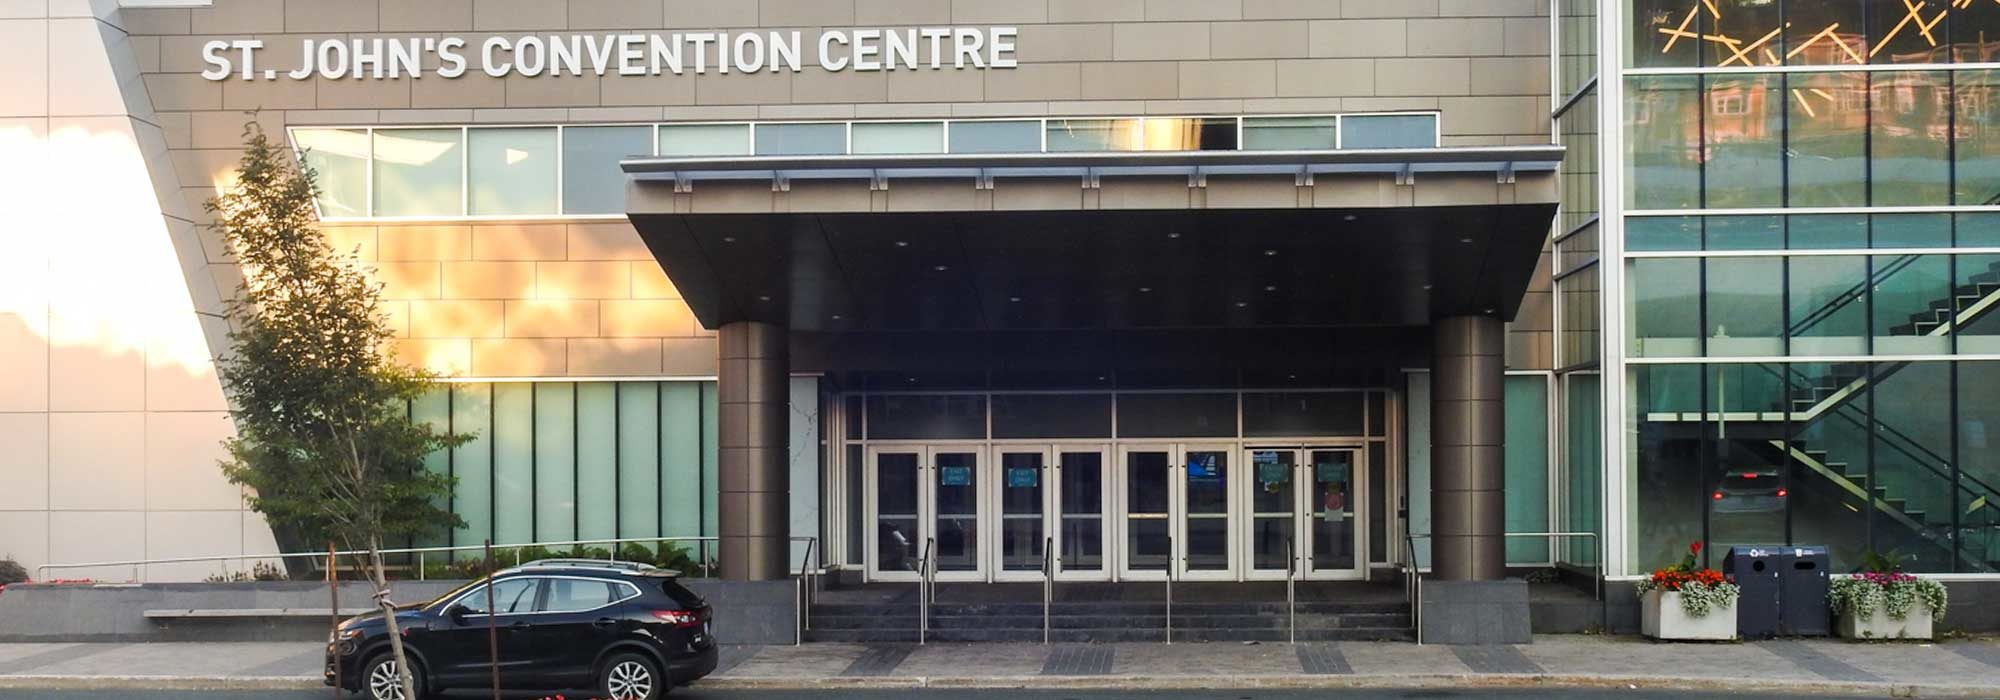 The exterior of the St. John's convention centre in daylight.